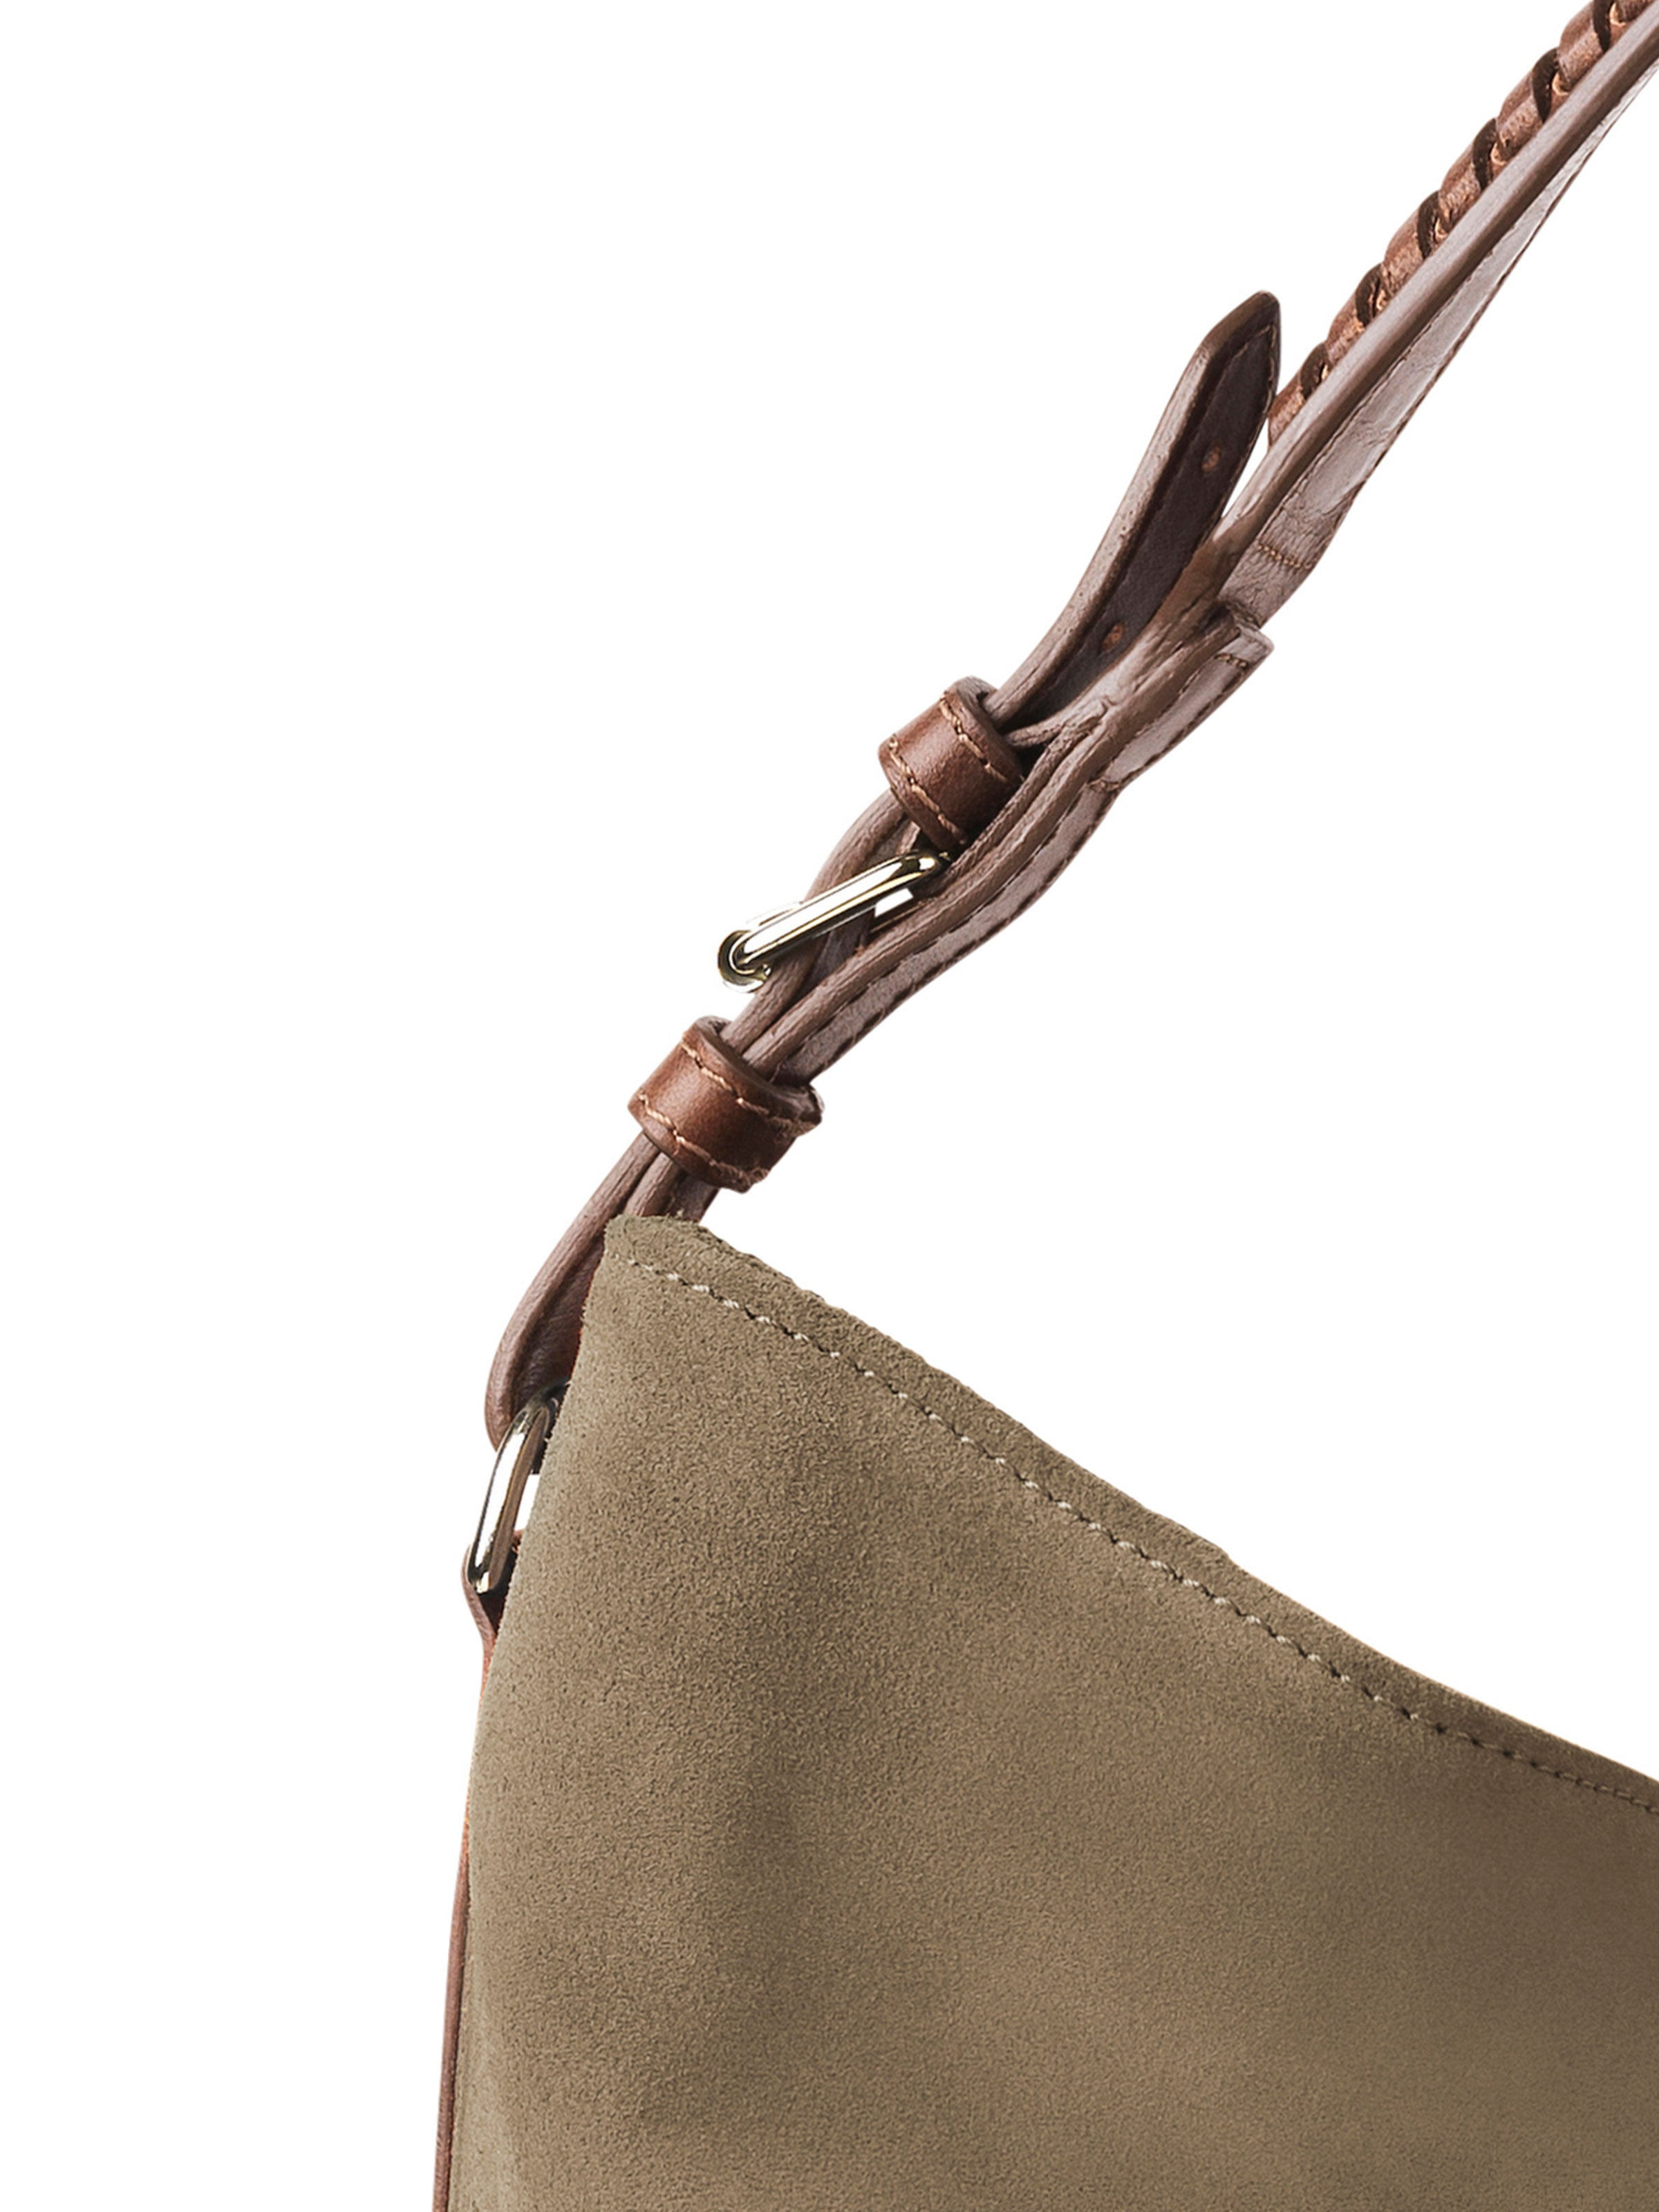 The Tetbury Tote Bag - Taupe Suede